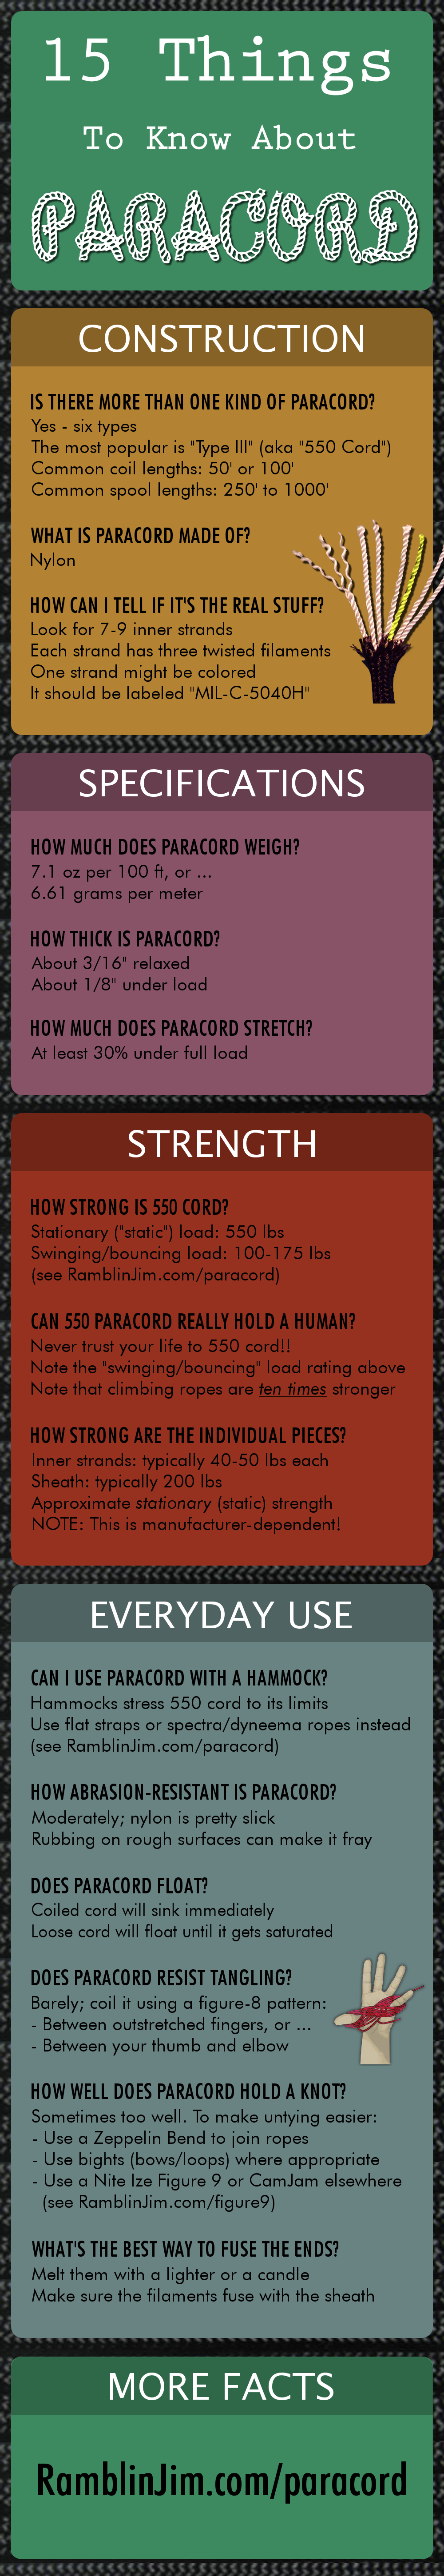 https://www.ramblinjim.com/images/paracord/paracord-infographic.png